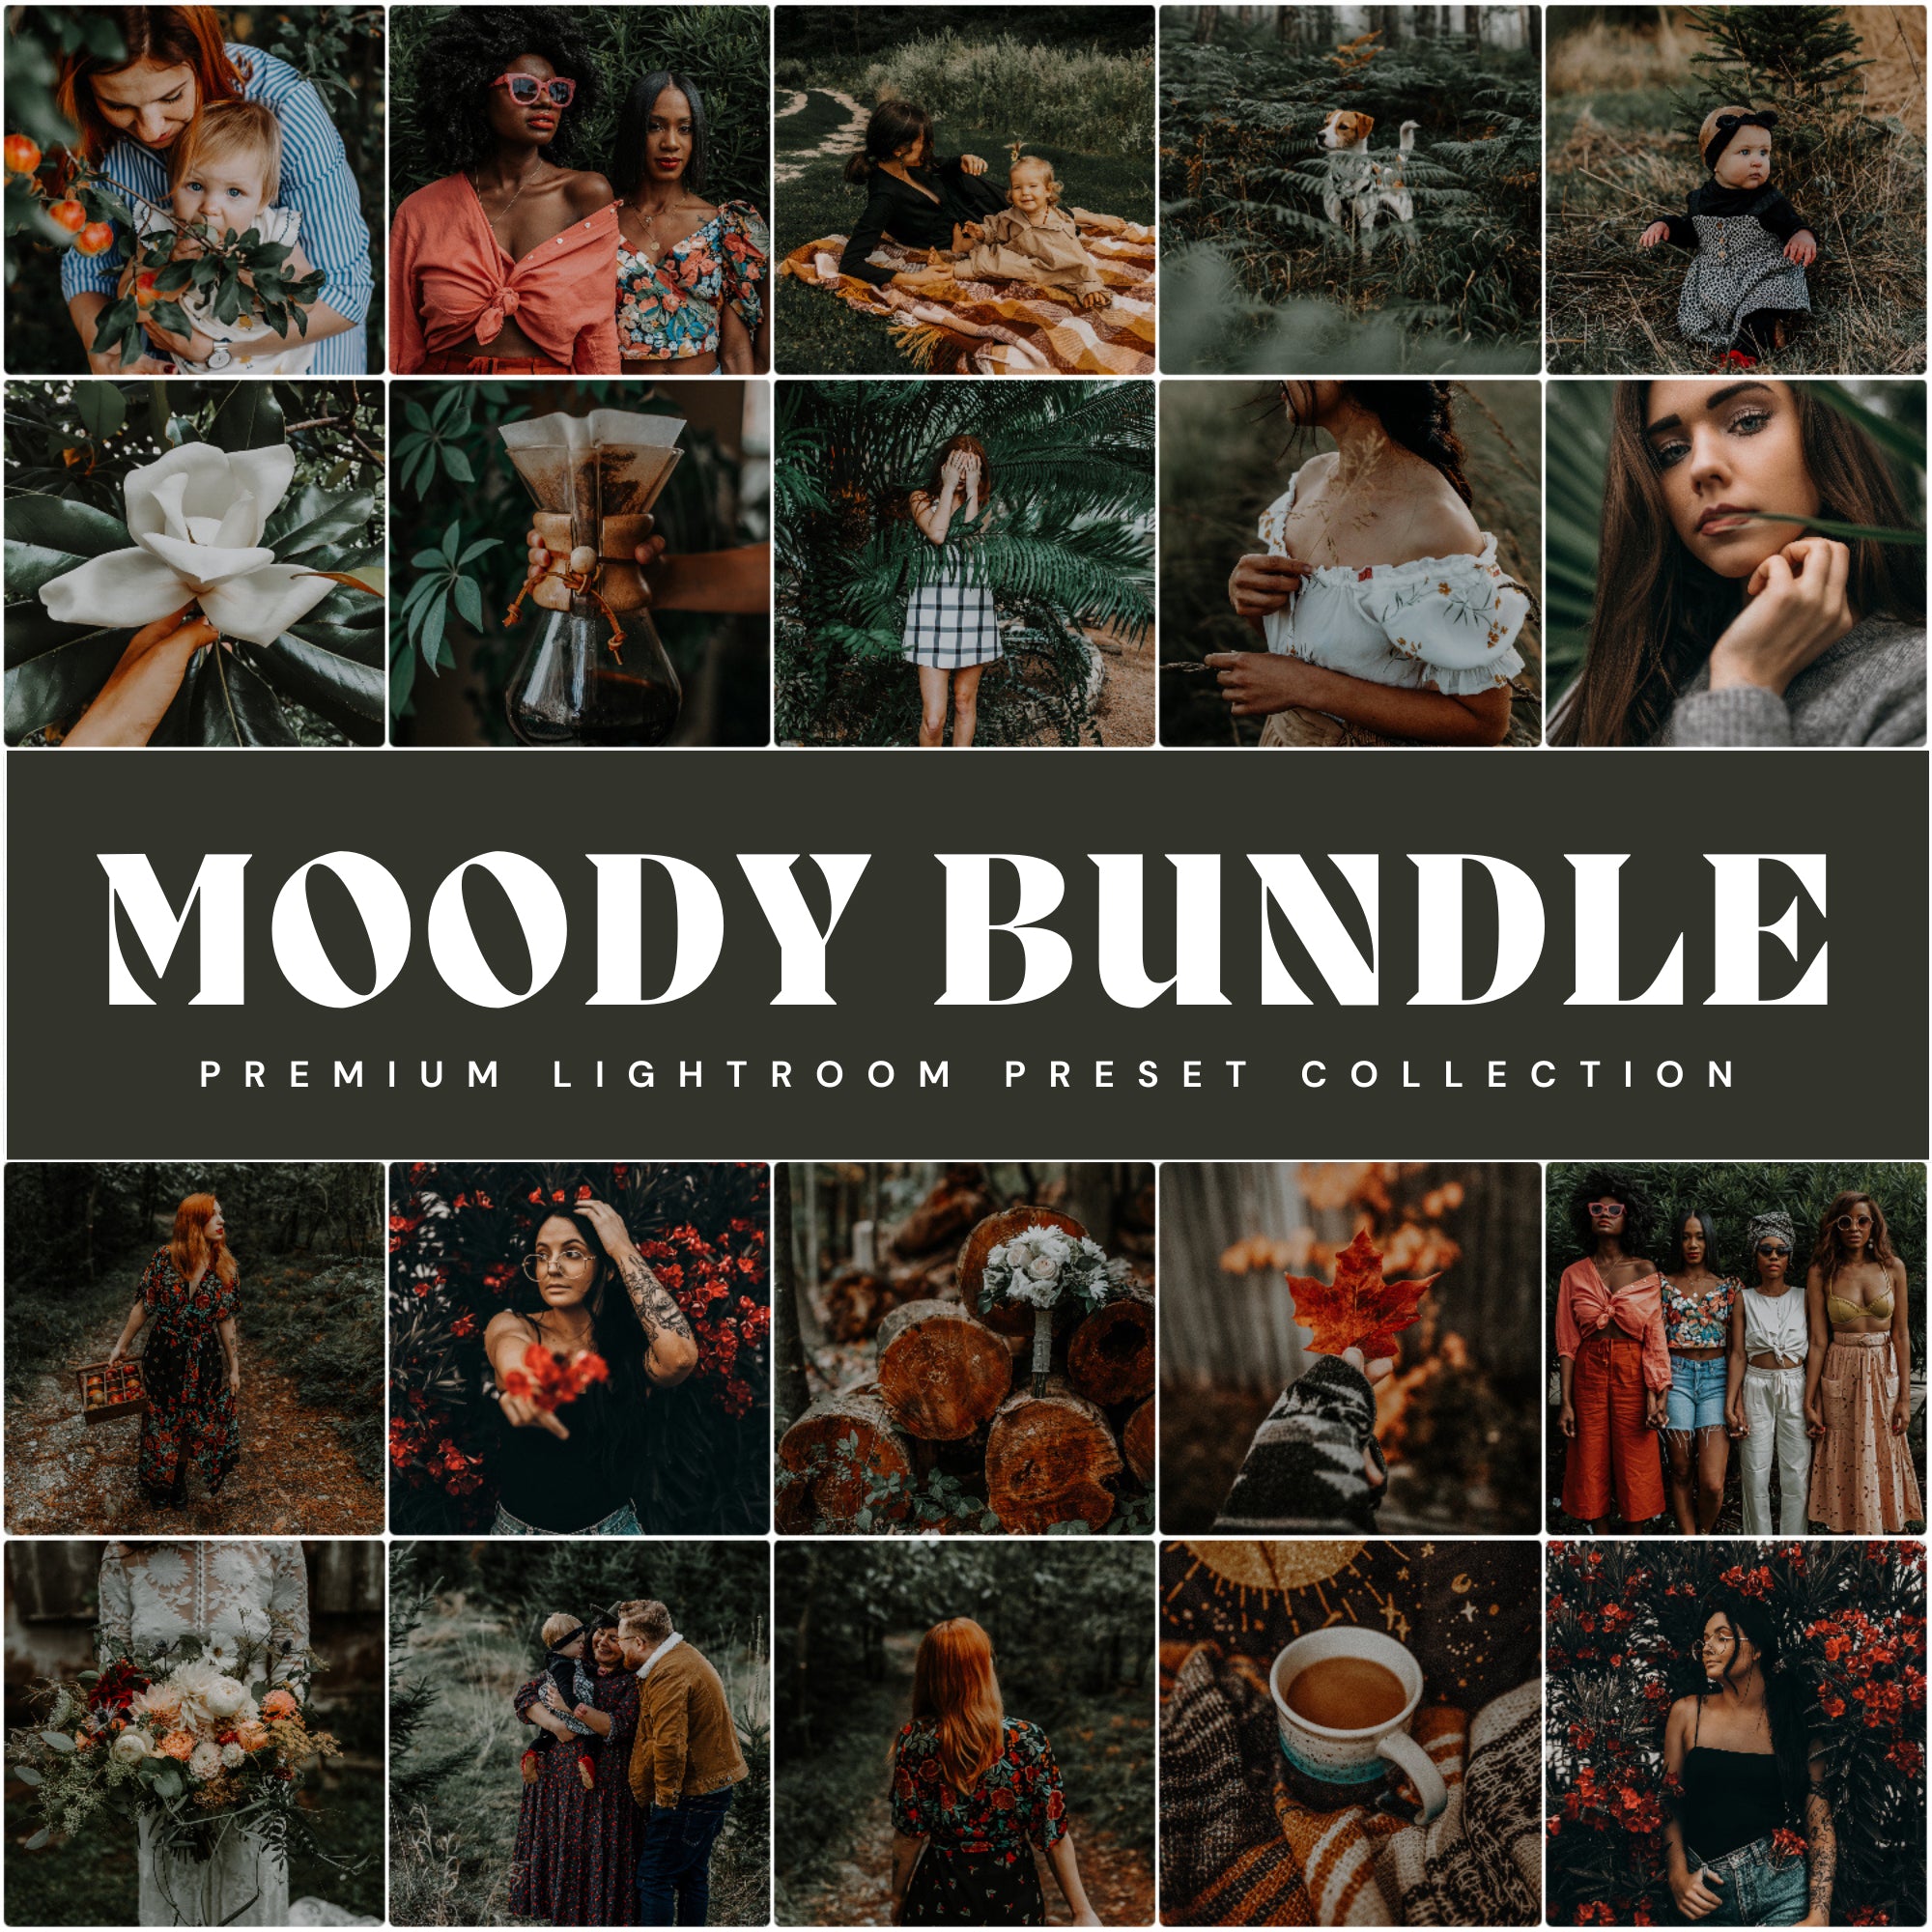 Lou And Marks Presets Moody Lightroom Presets Bundle The Best Moody Presets